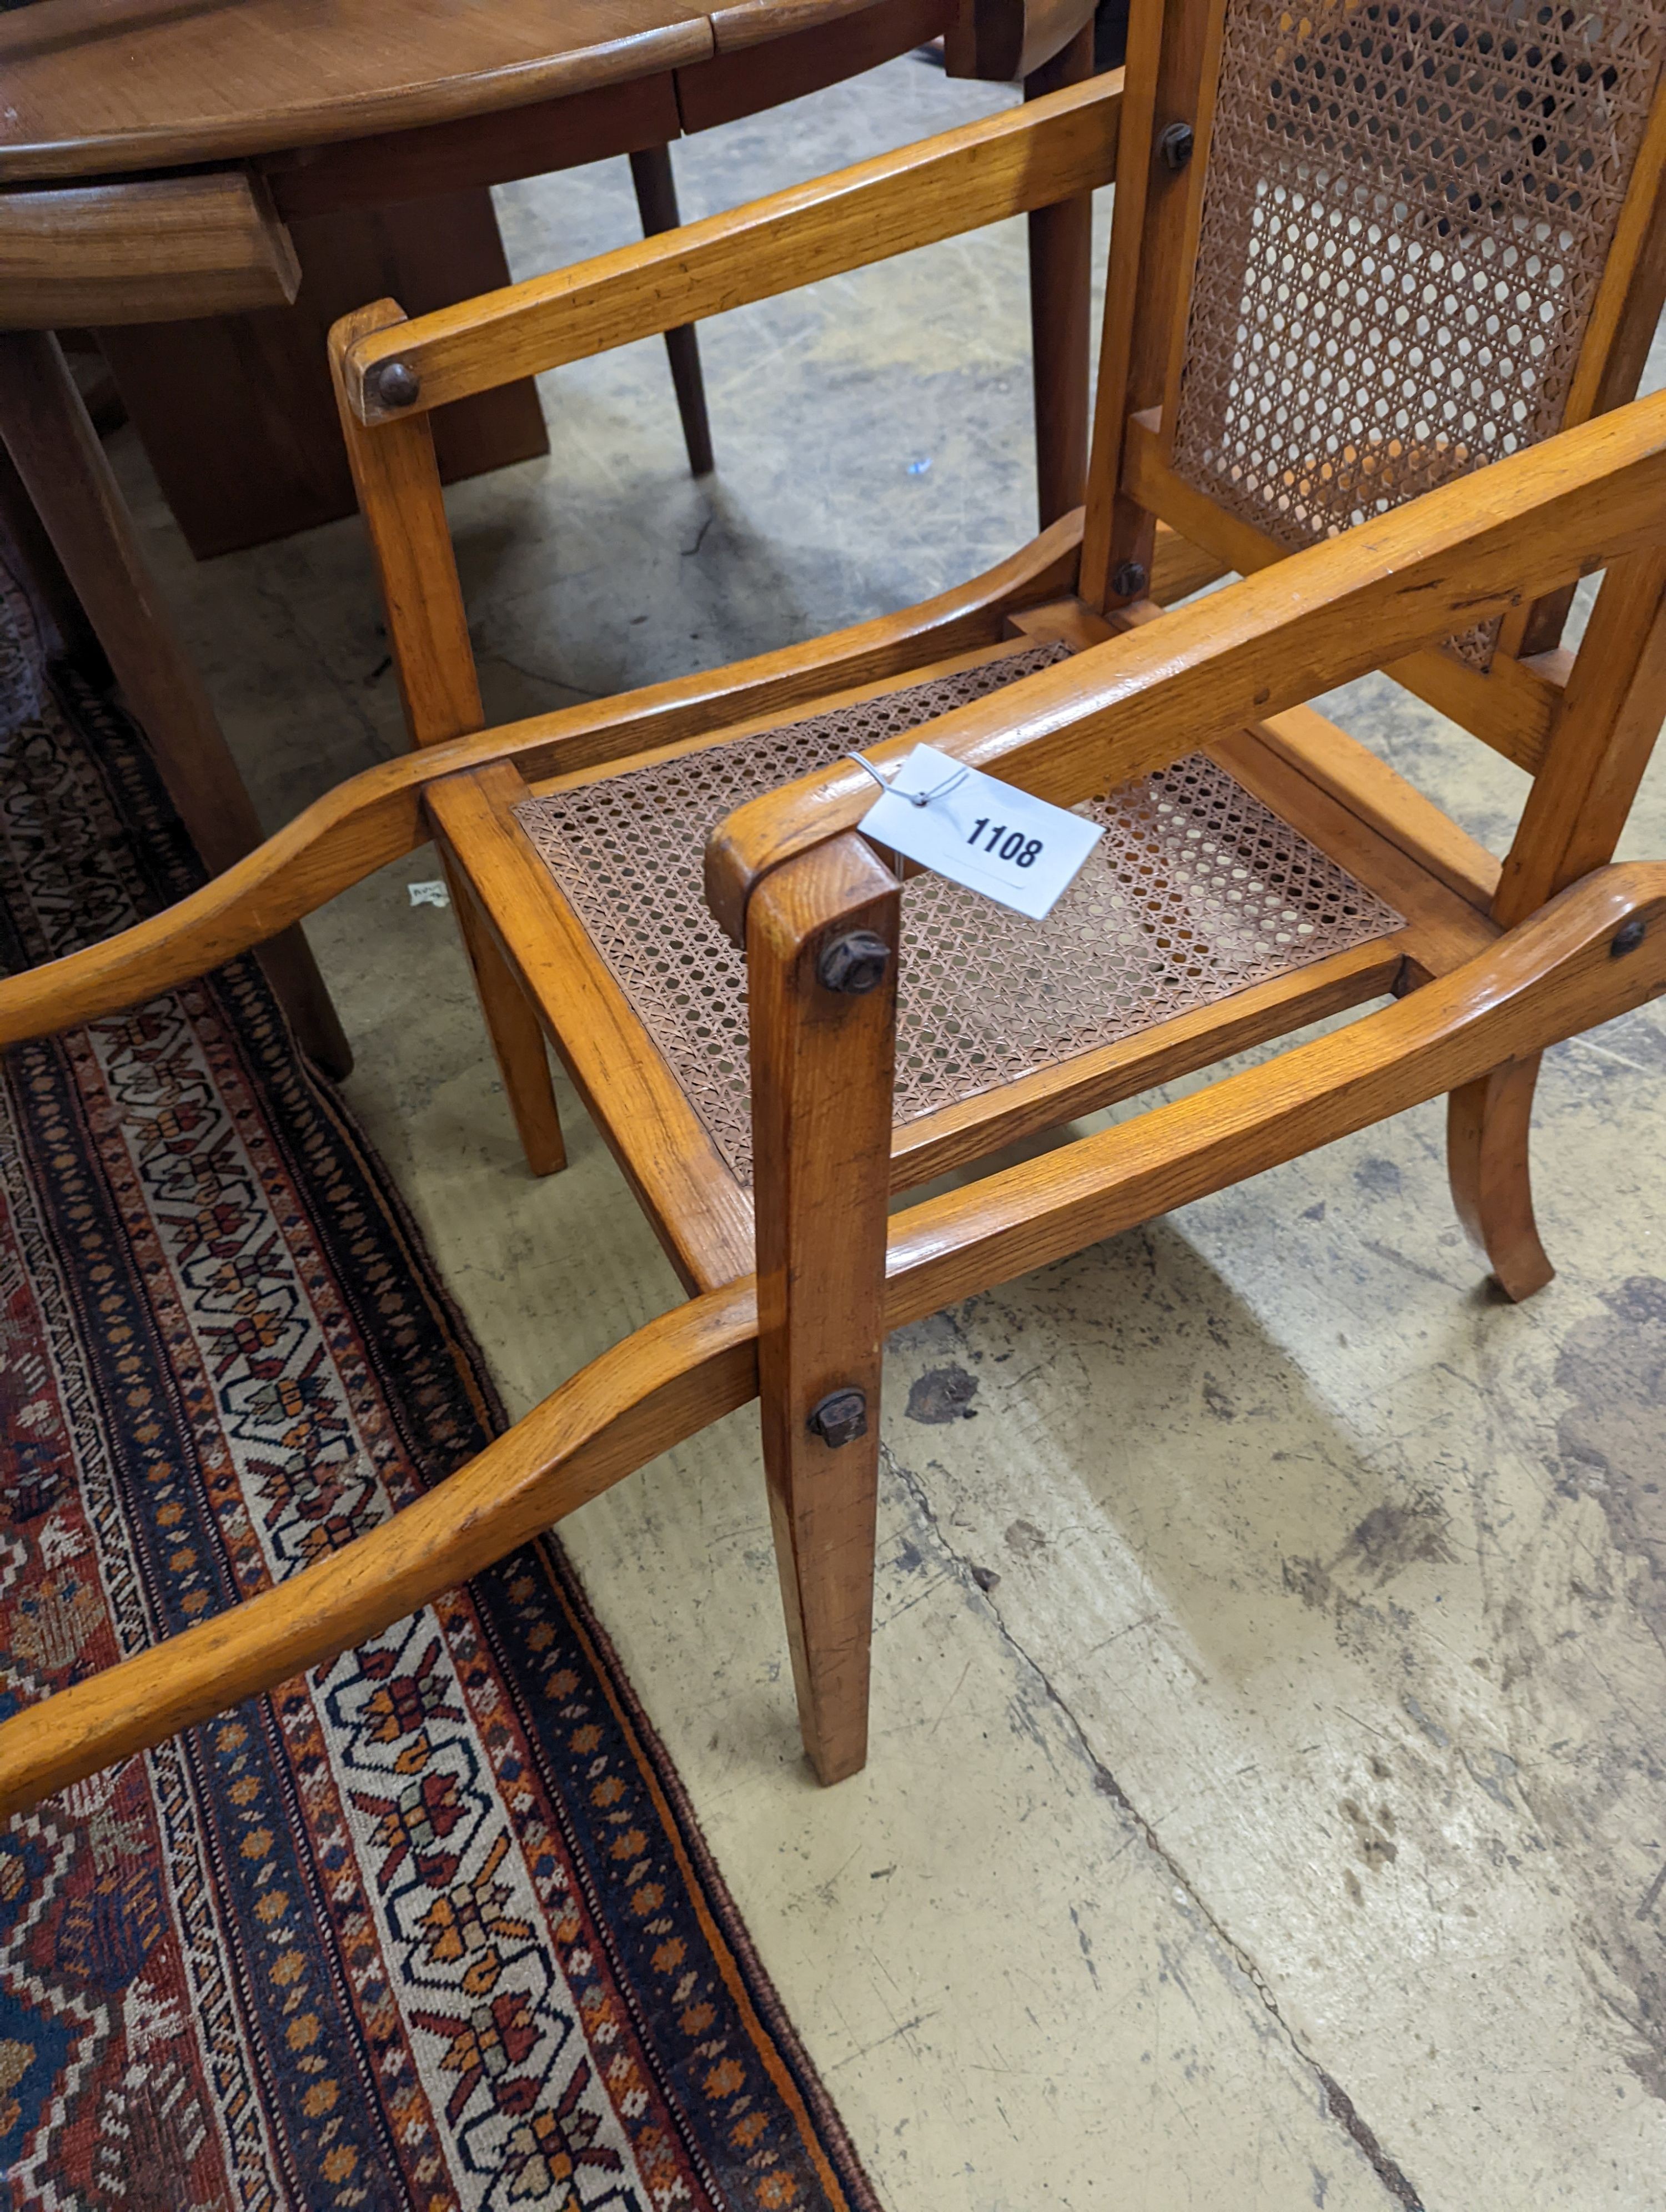 A late Victorian Leveson & Sons caned oak folding invalid's chair